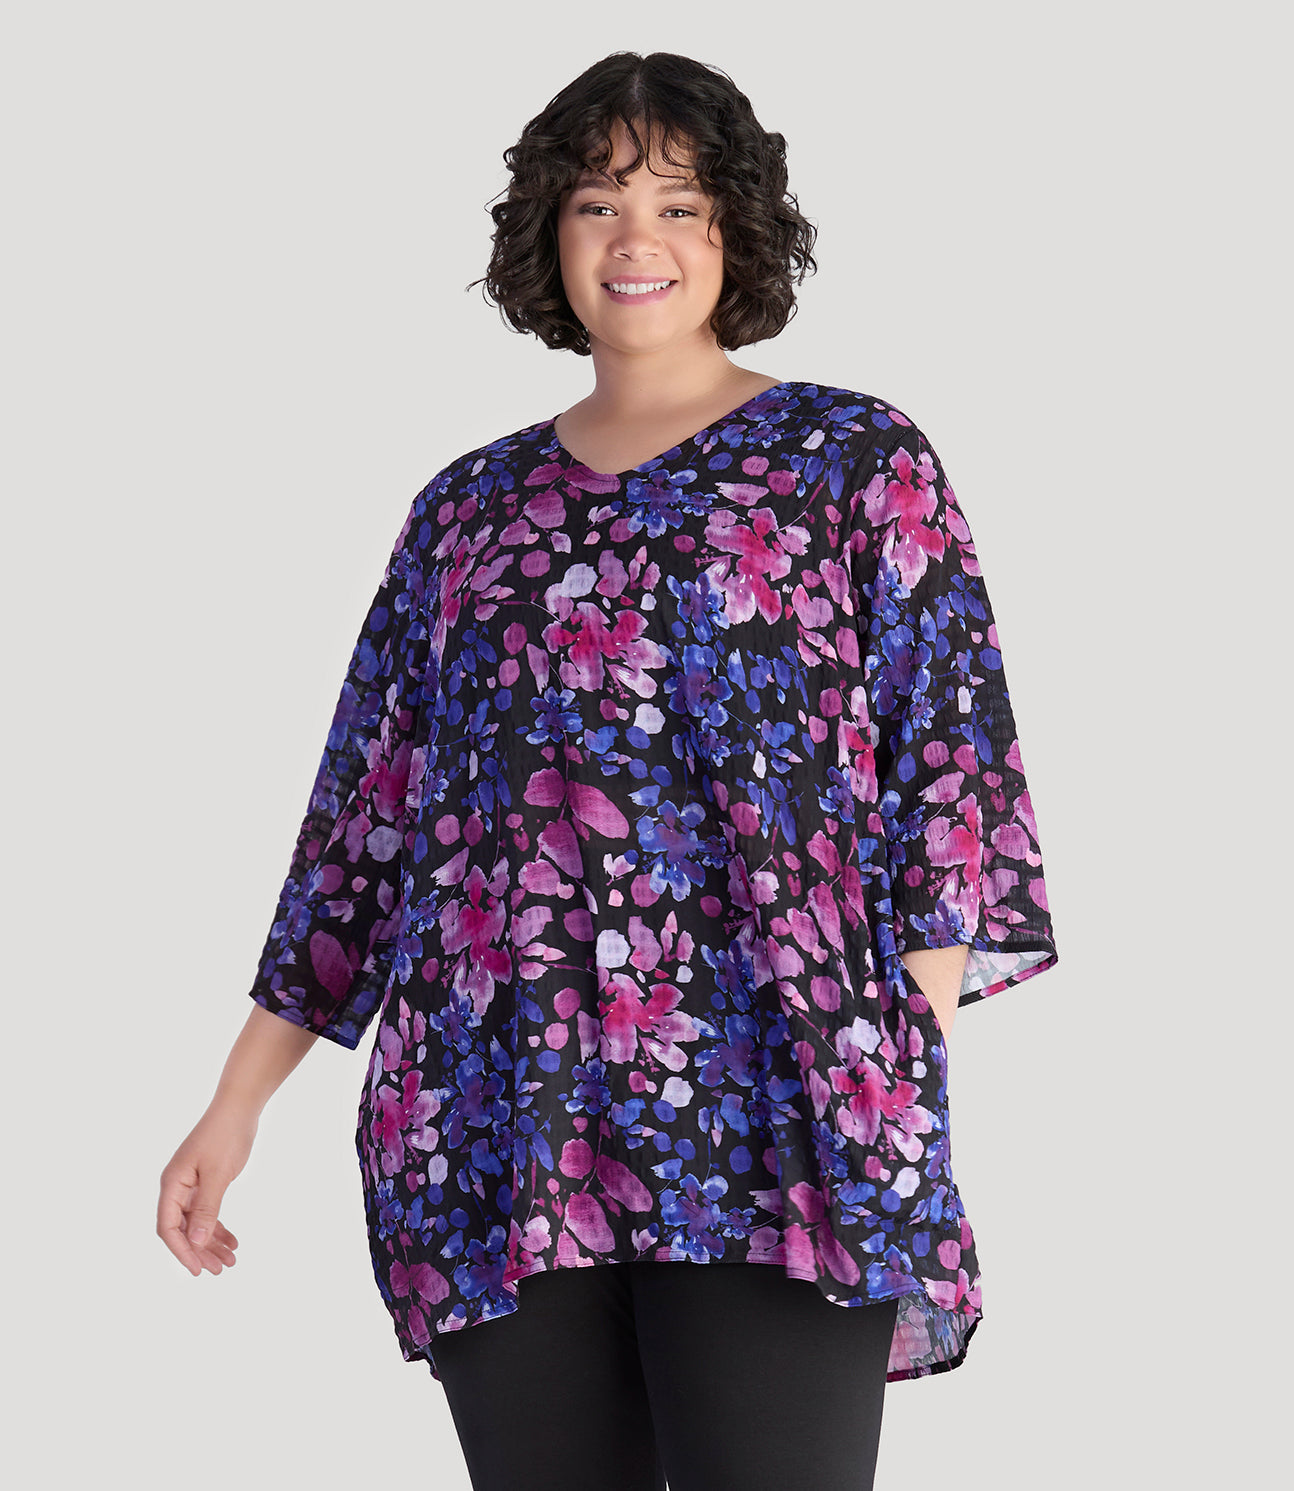 Plus size model, facing front, wearing JunoActive's BellaStyle Tunic Cover-up in floral elegance print.